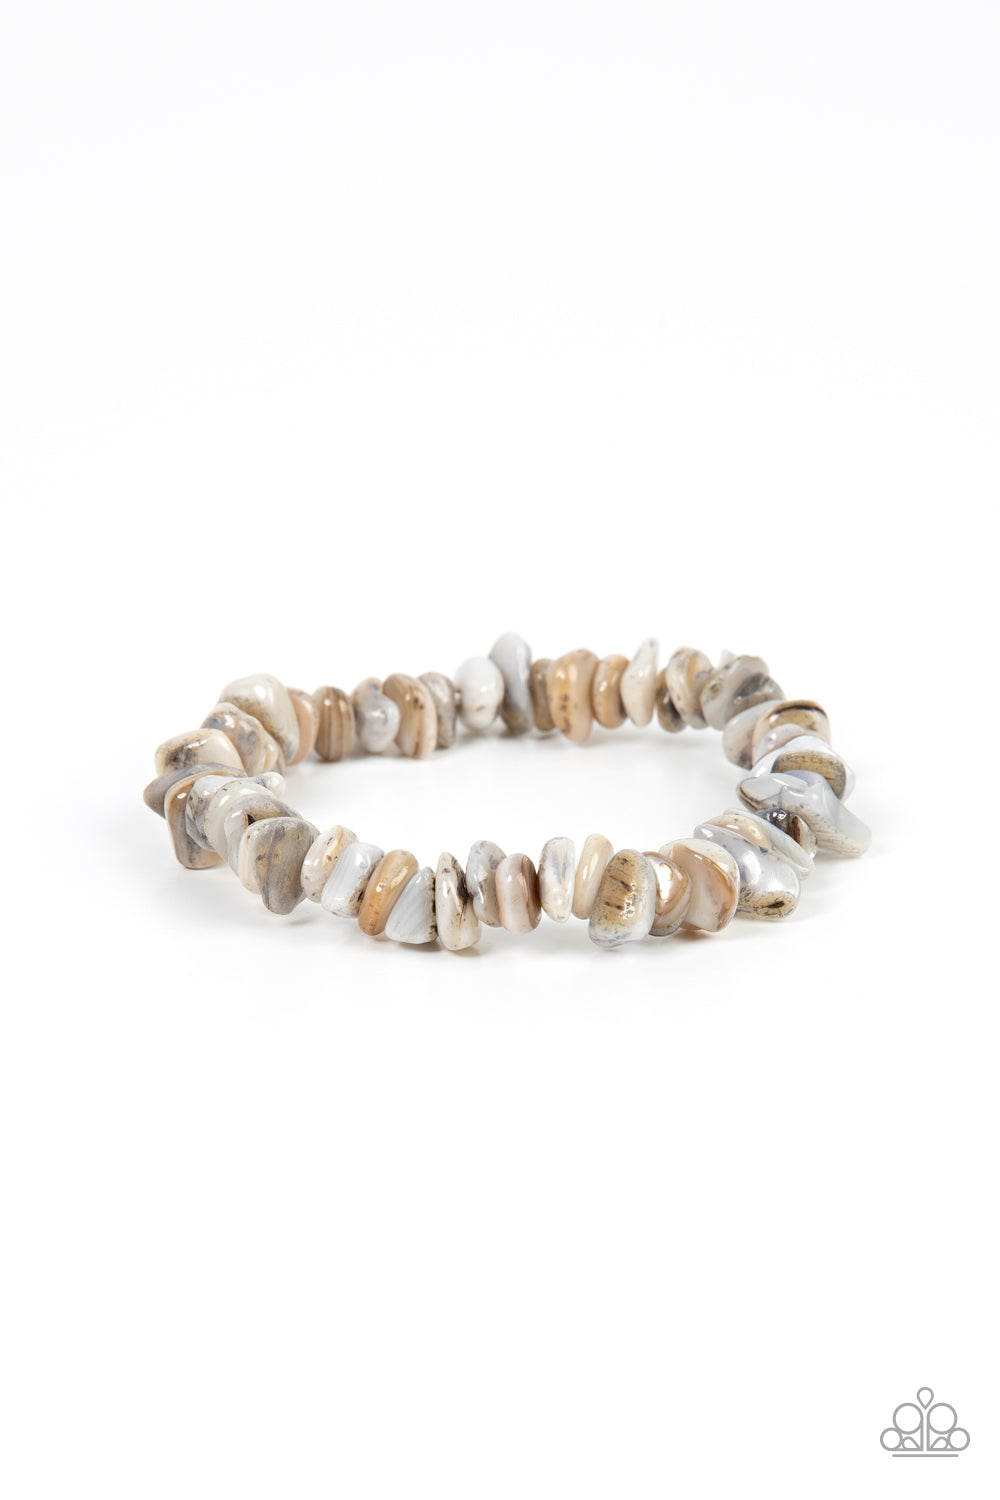 Paparazzi Accessories Grounded for Life - Multi Pebble Bracelets an earthy assortment of natural pebble-like stones are threaded along a stretchy band around the wrist, resulting in a grounding pop of color.  Sold as one individual bracelet.